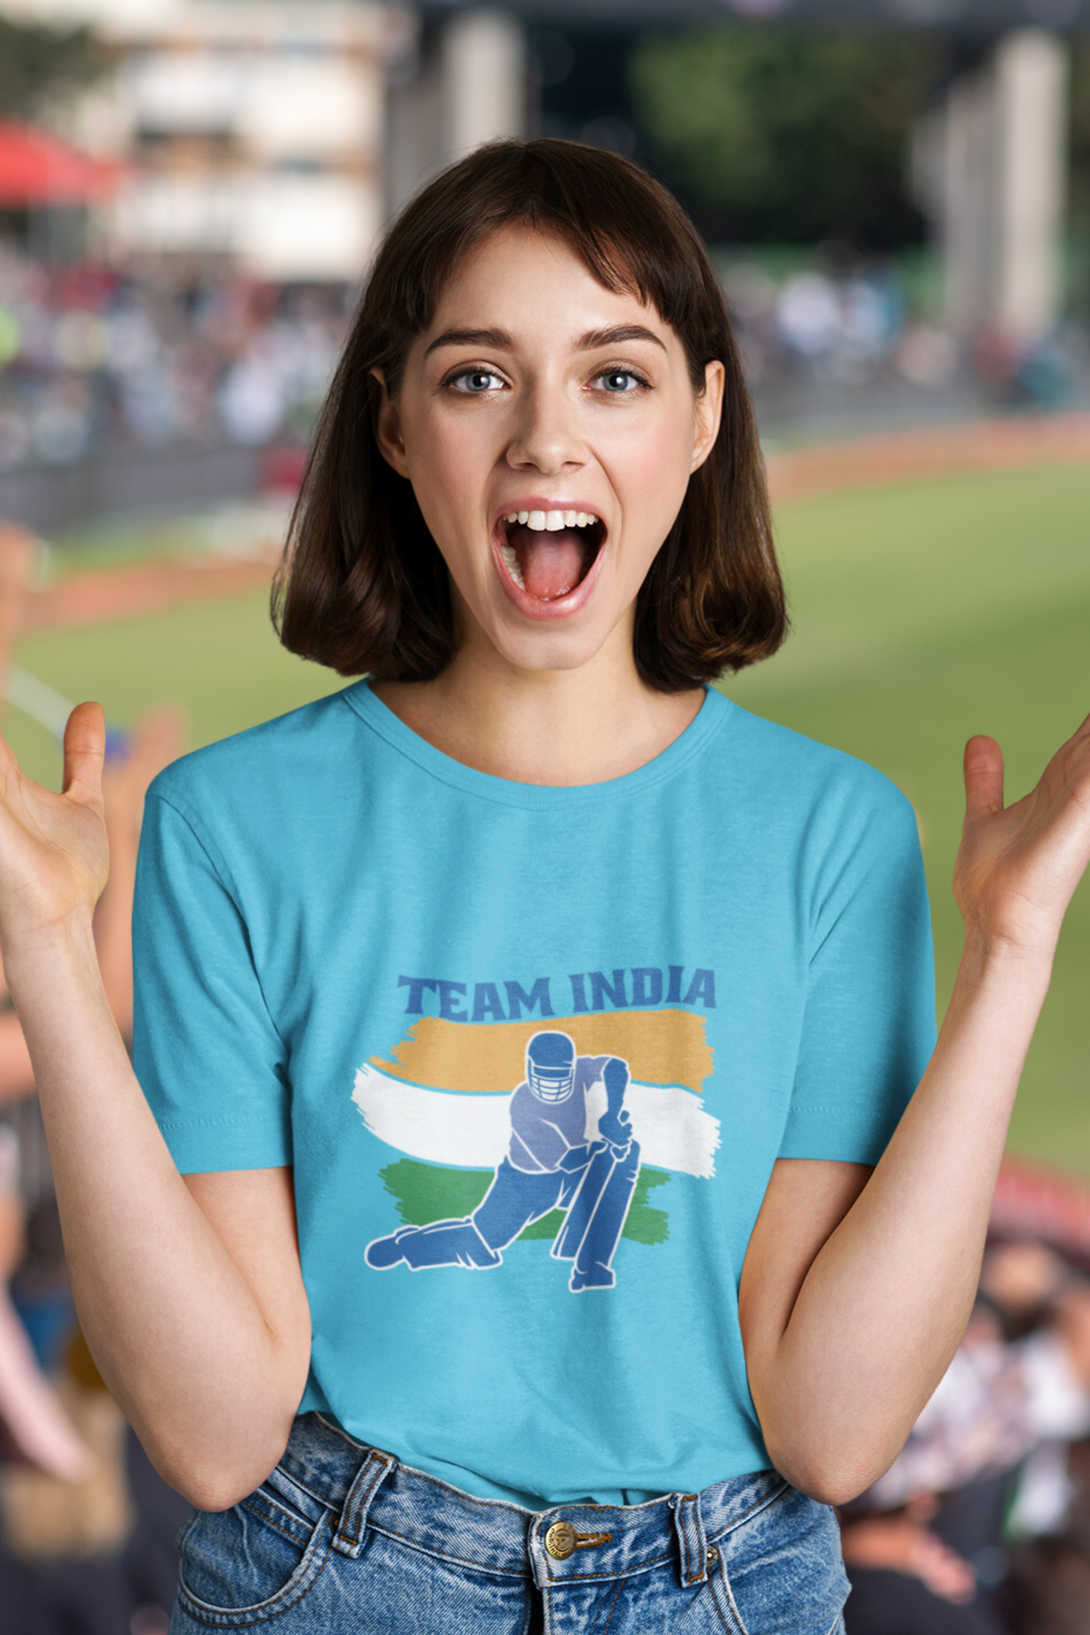 Team India Cricket Printed Scoop Neck T-Shirt For Women - WowWaves - 2